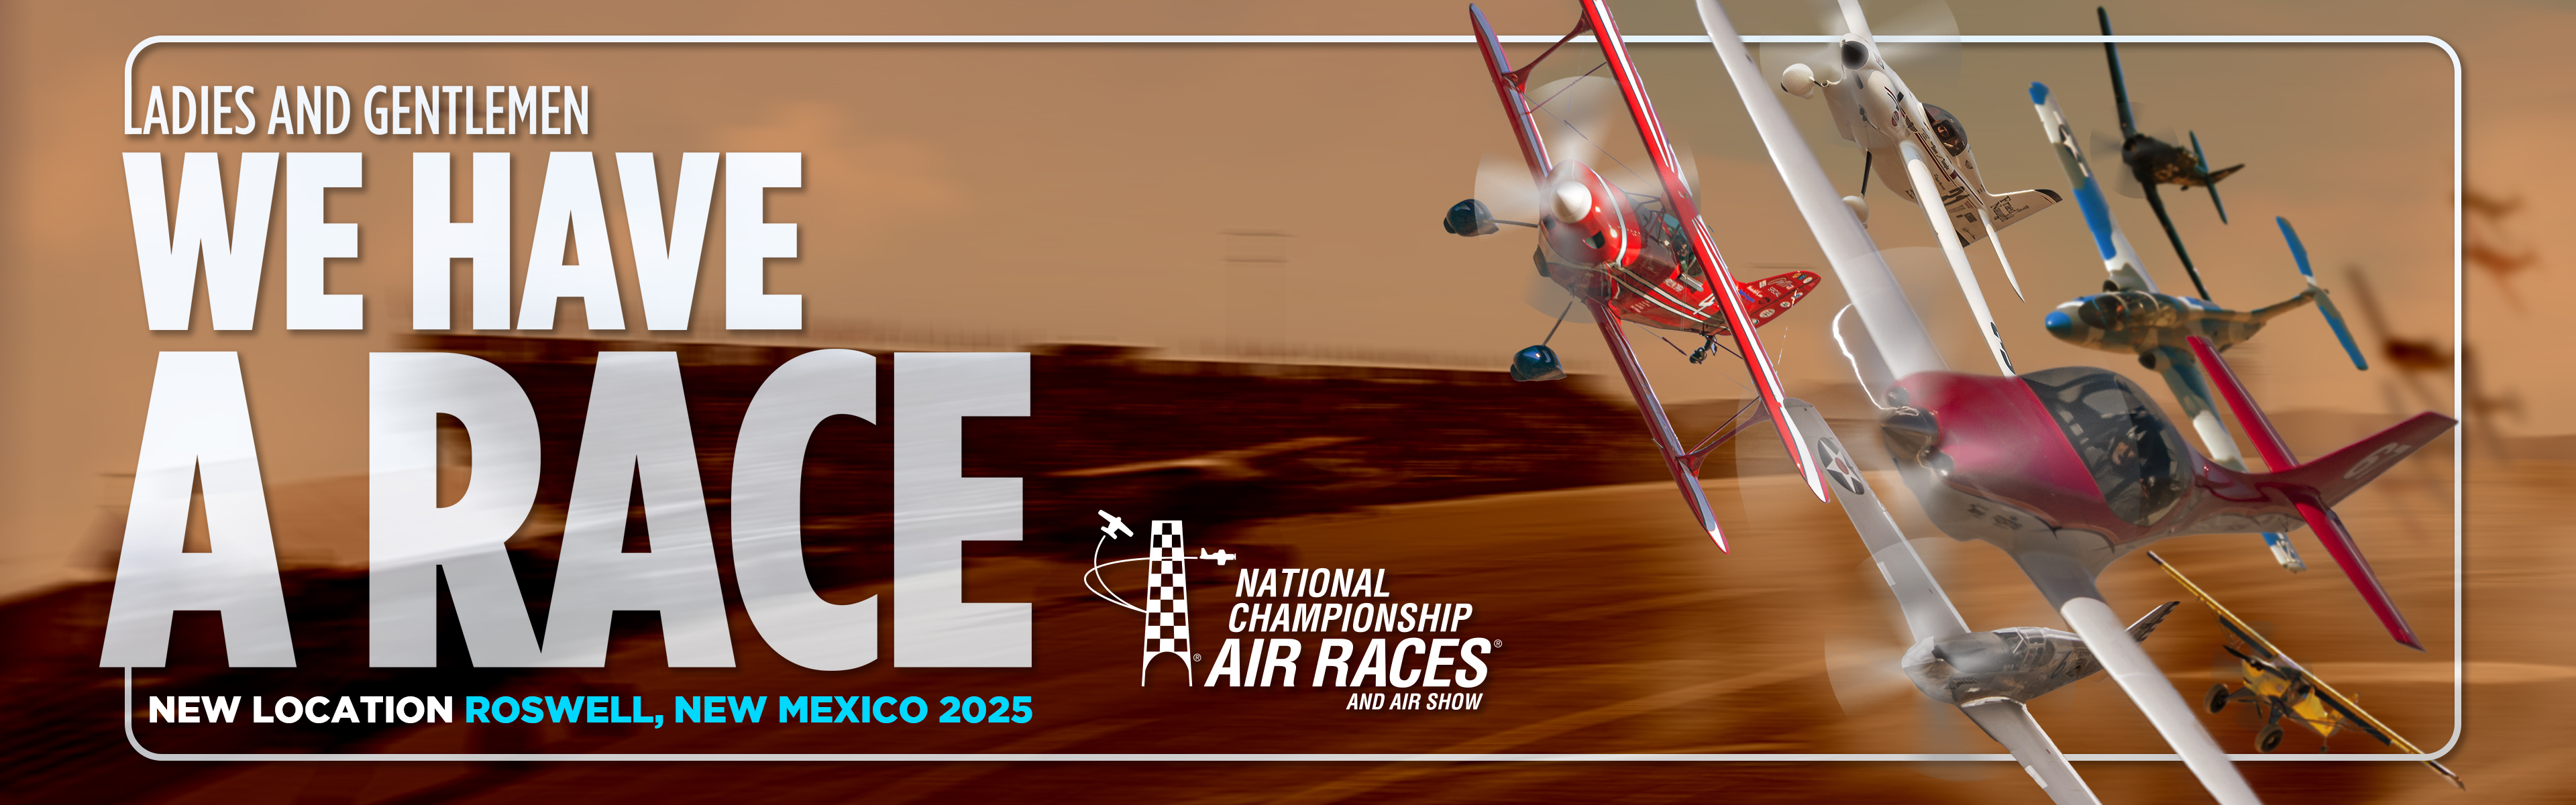 National Championship Air Races and Air Show - Ladies and Gentleman We Have a Race | New Location: Roswell, New Mexico 2025